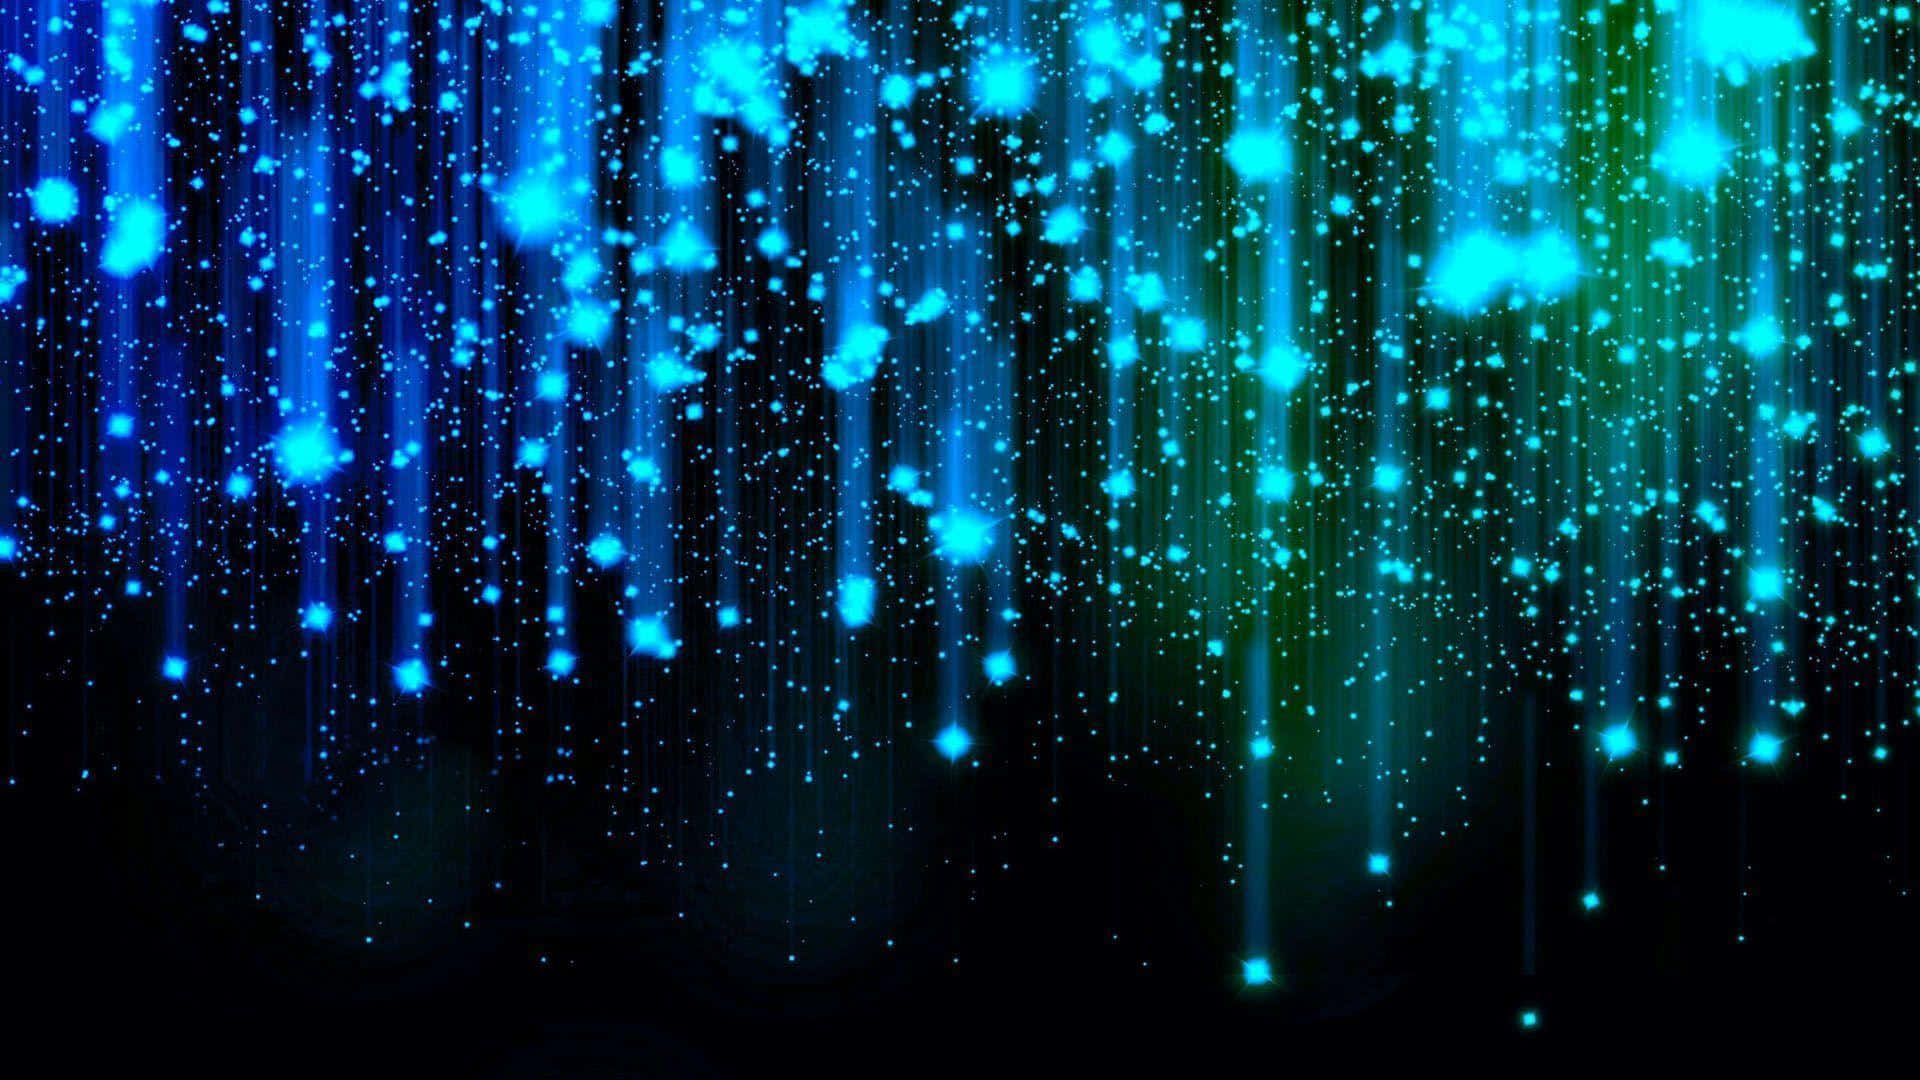 Feel the spark in a night filled with Blue Stars Wallpaper